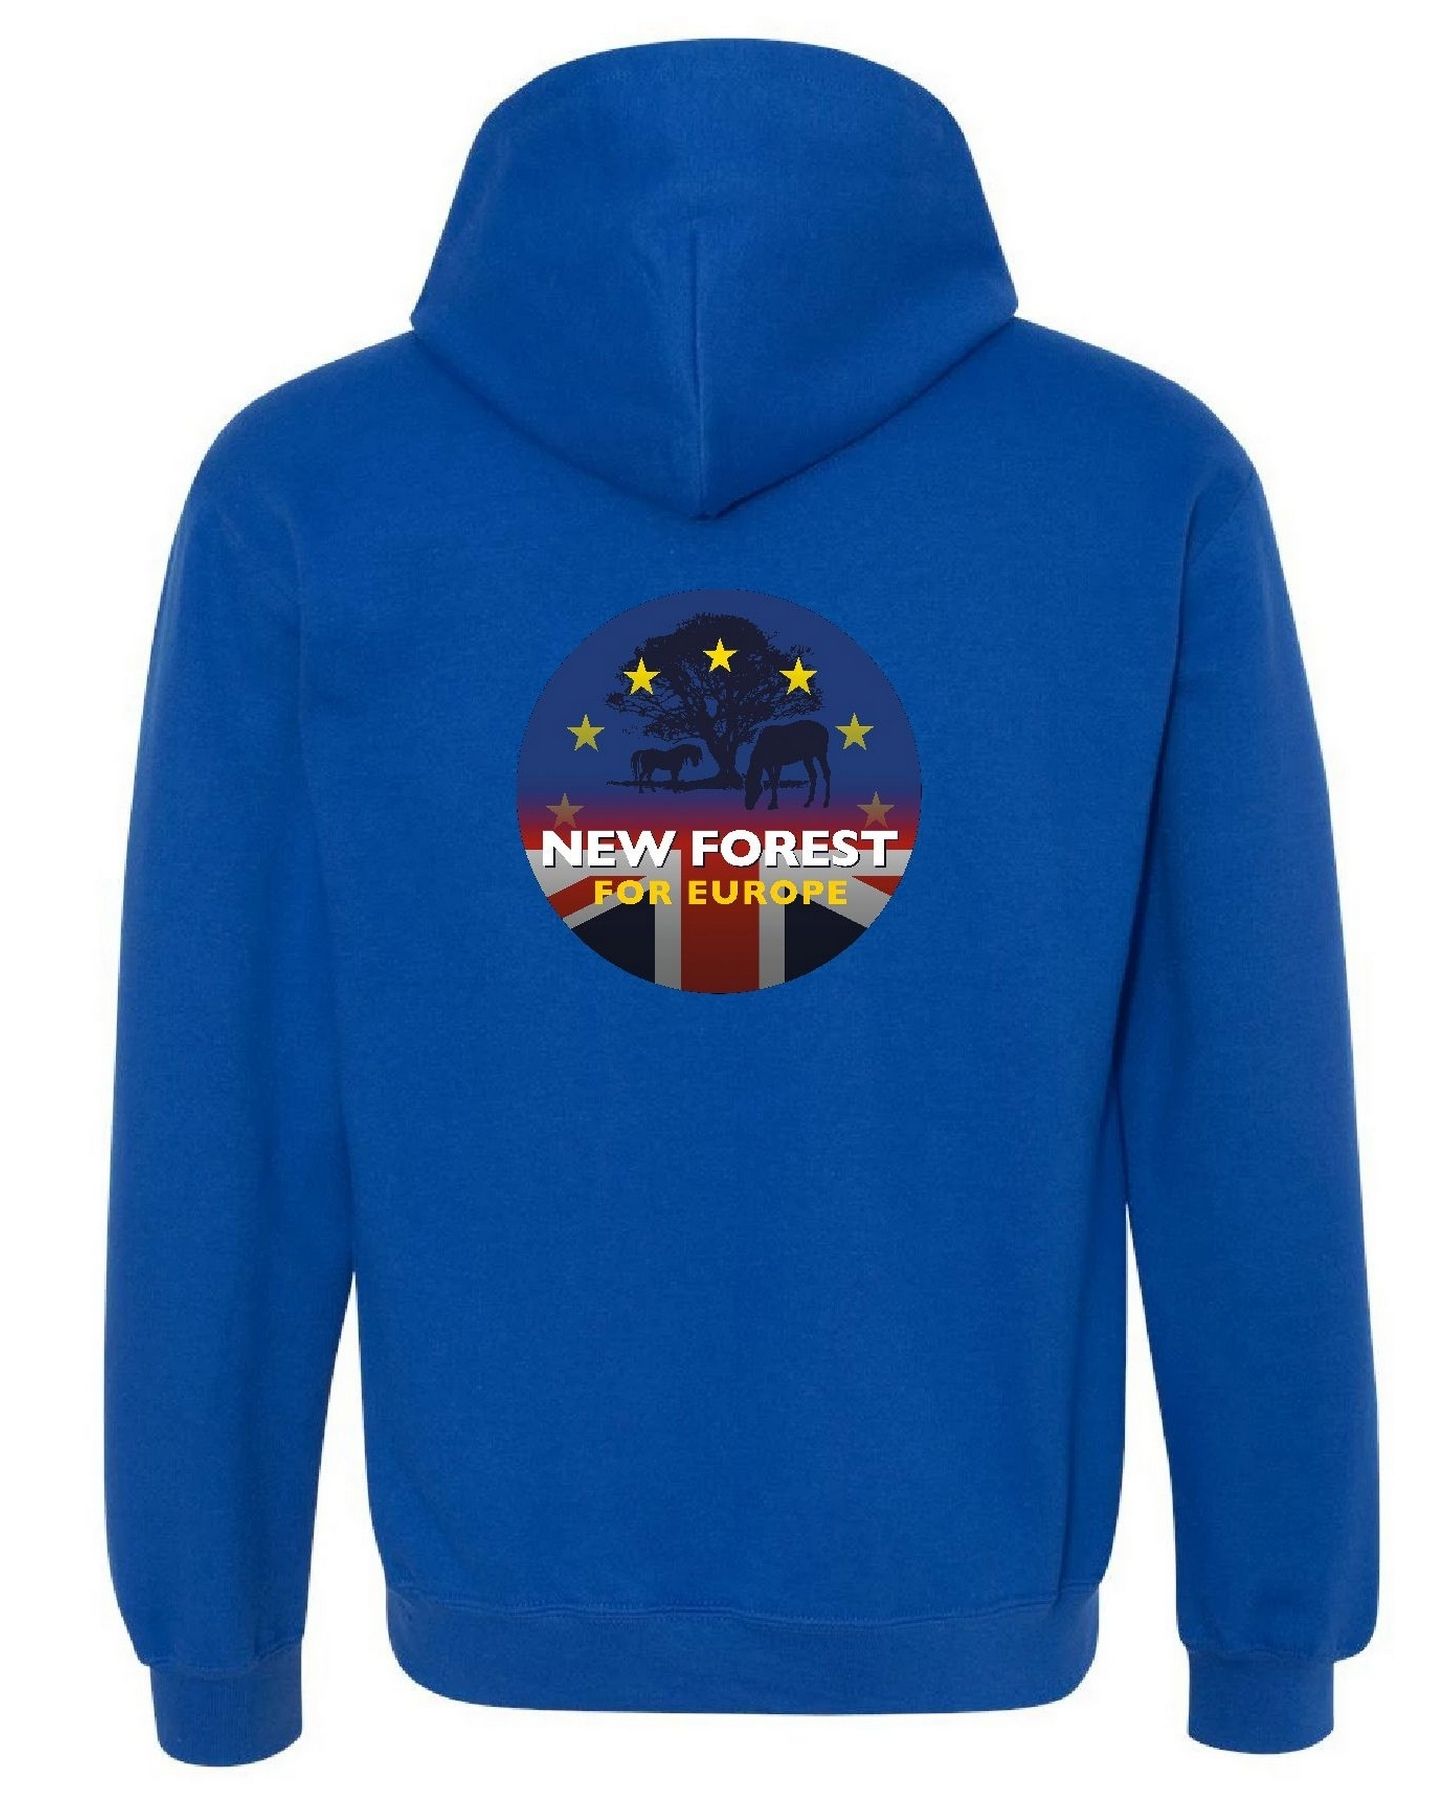 New Forest for Europe – Zip Hoodie (Unisex)